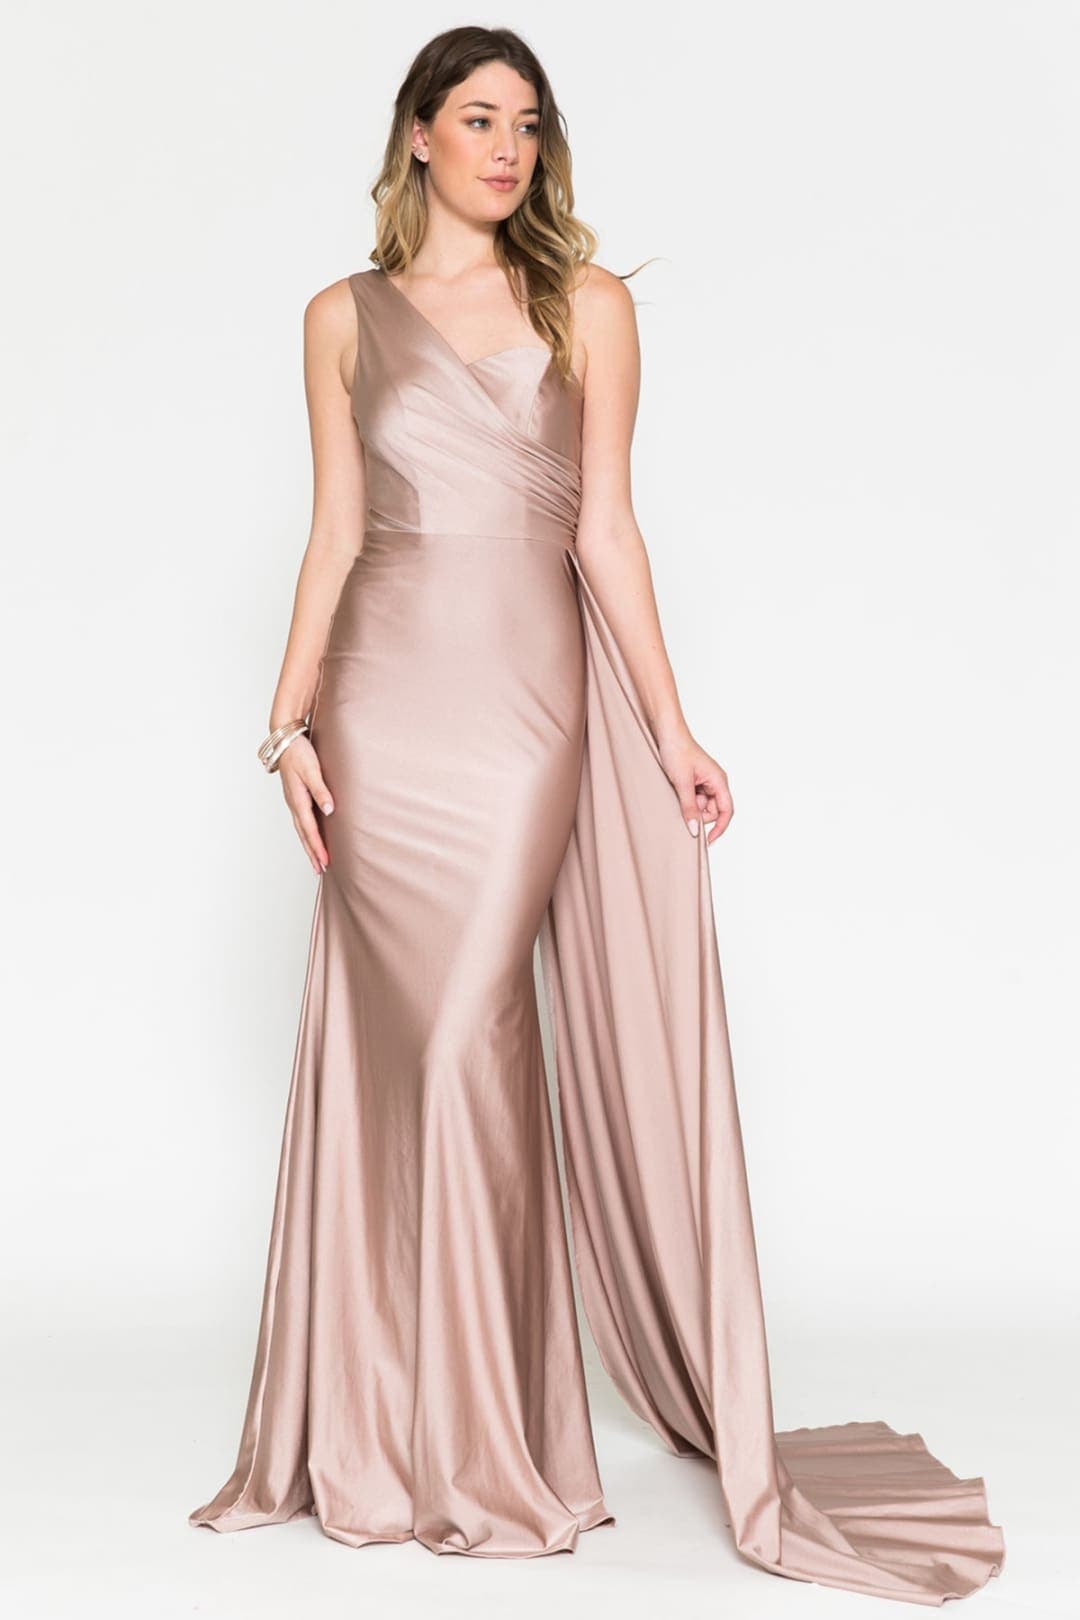 Prom Stretchy Evening Gown